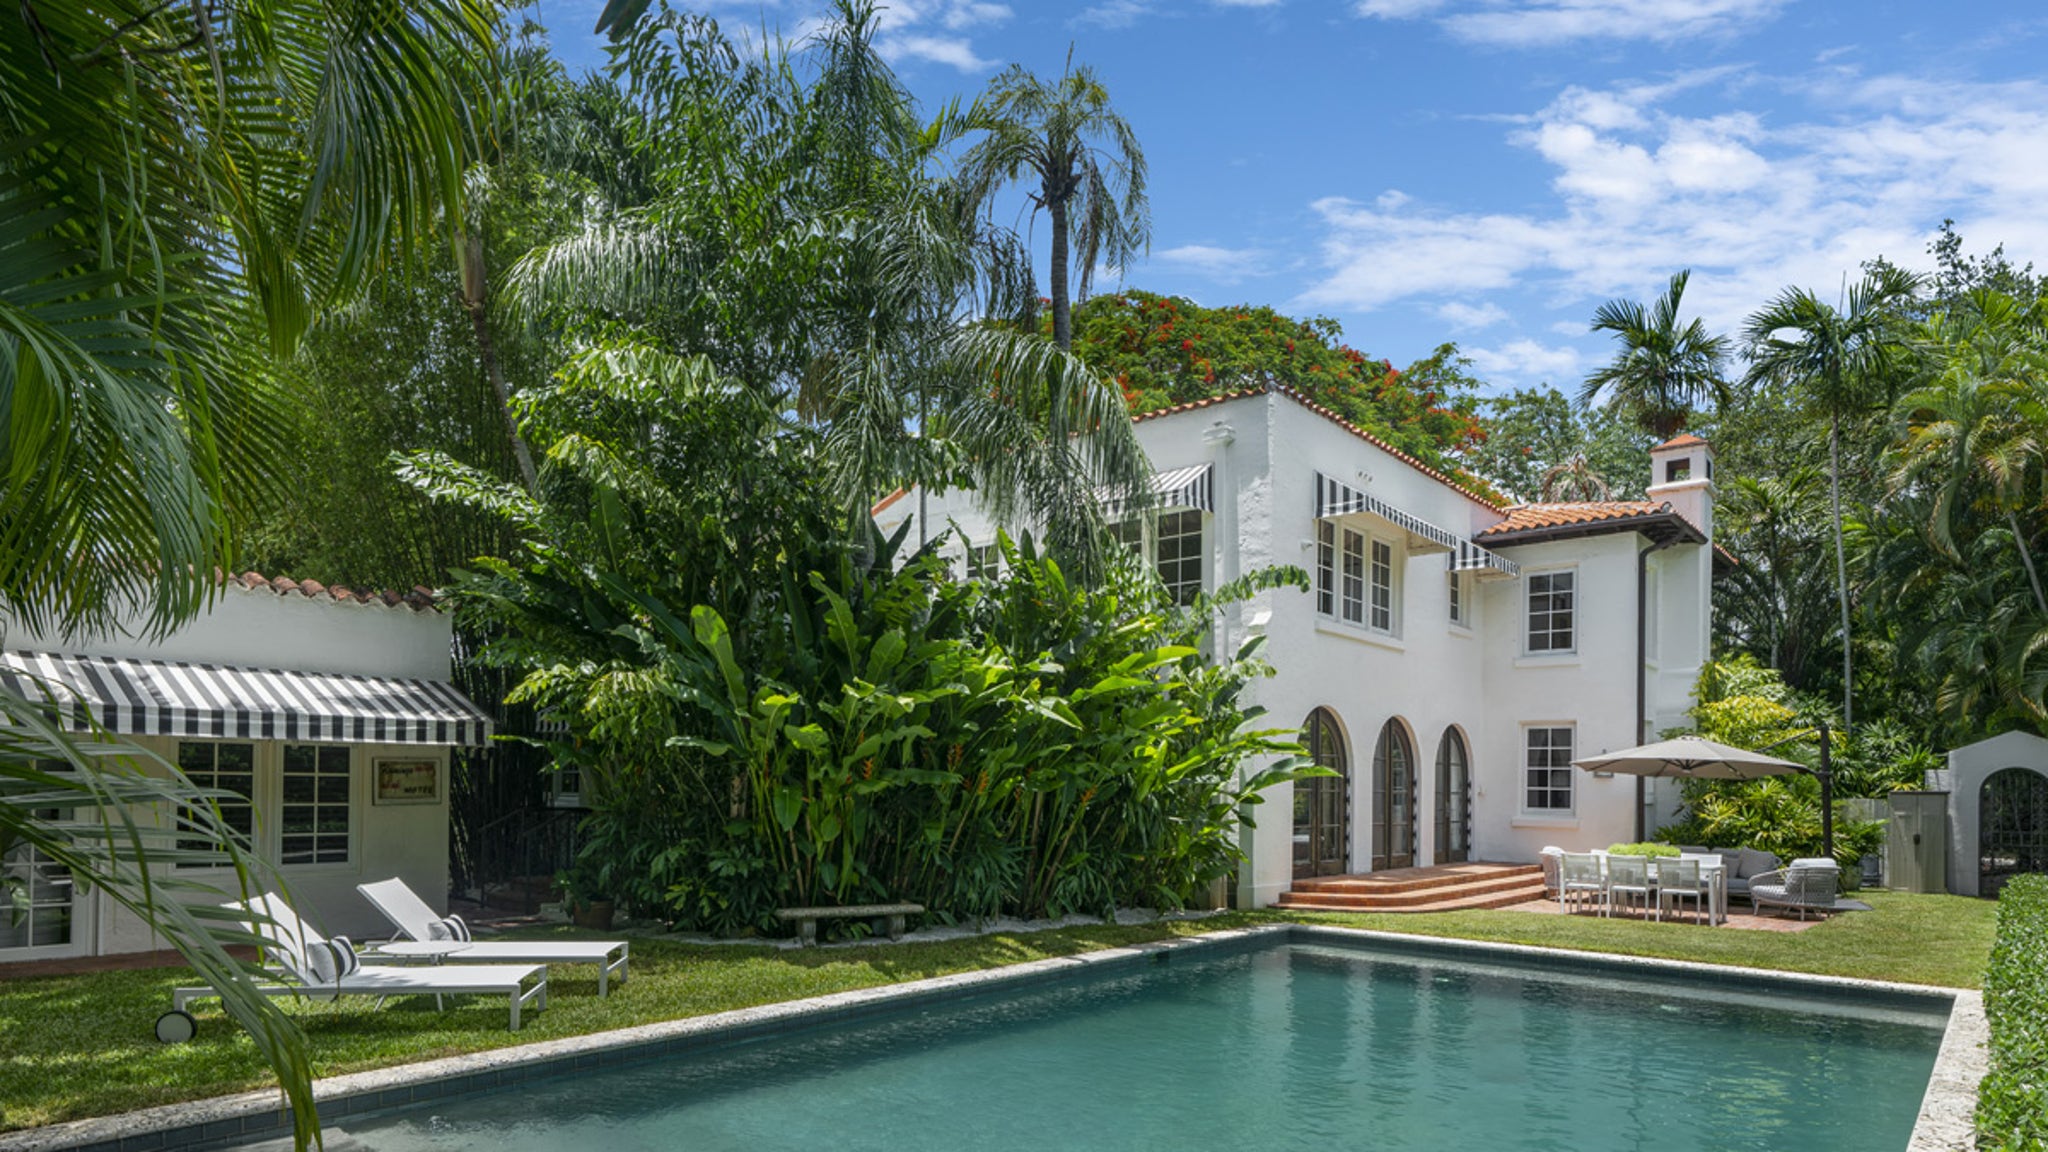 Christian Slater is selling his Miami home after just 3 days on the market